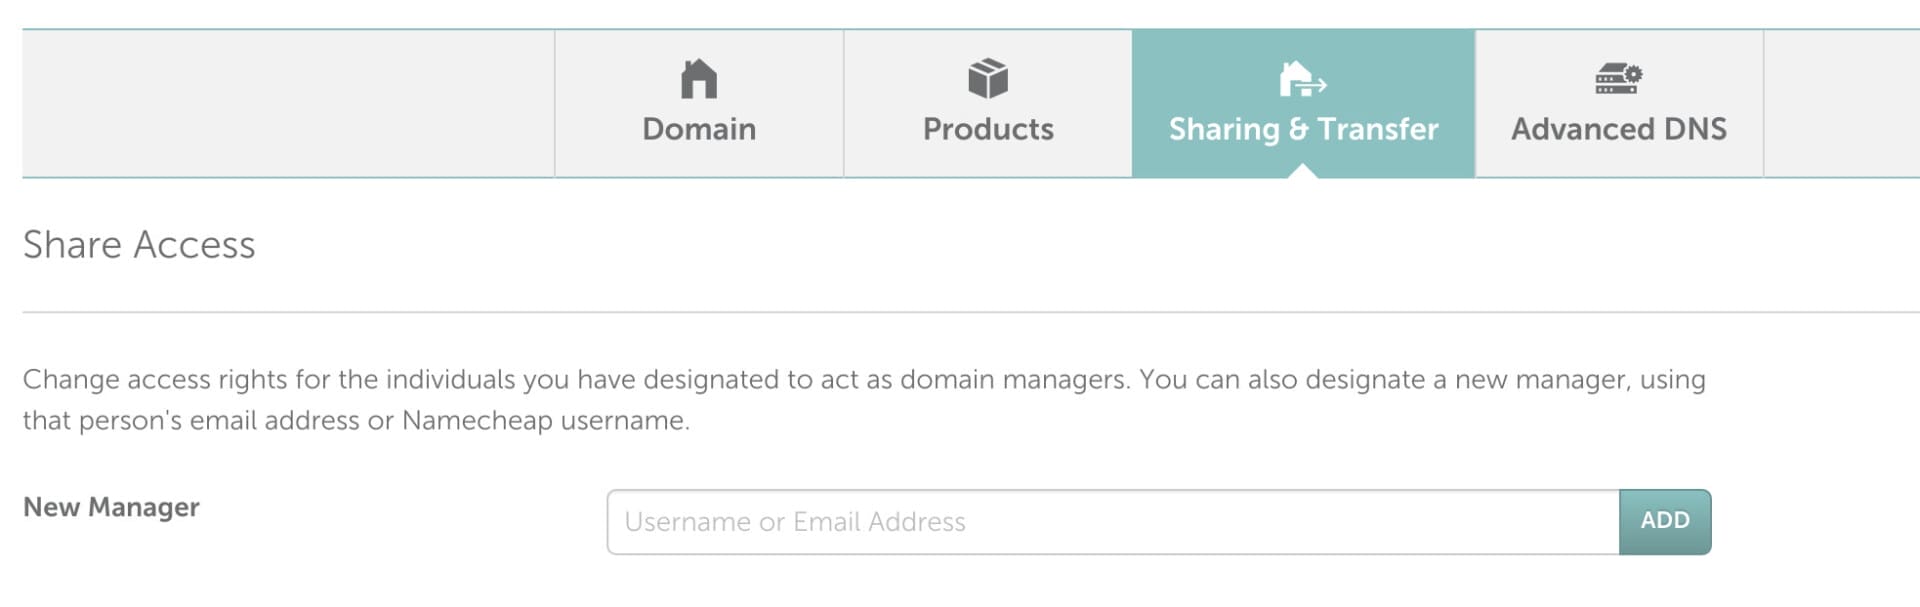 screenshot showing where to add new manager email to namecheap.com domain